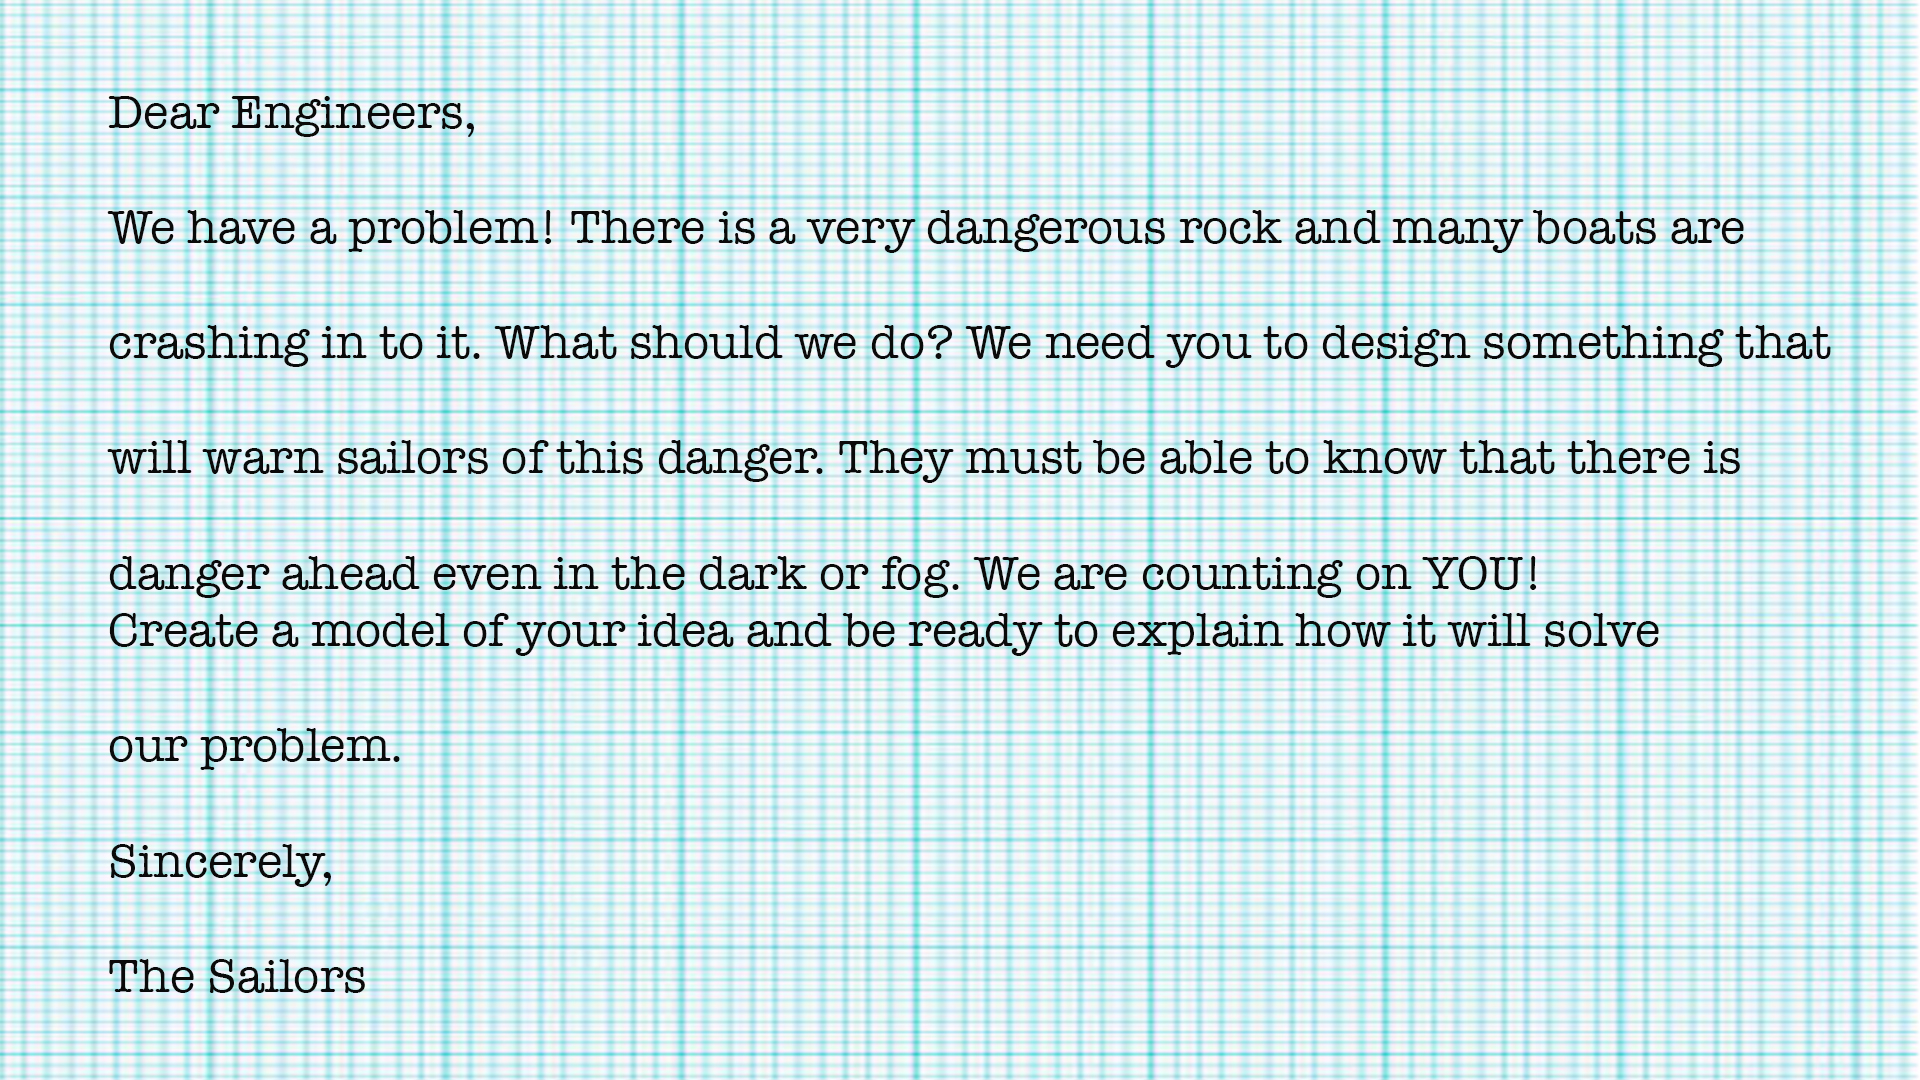 Dear Engineers, we have a problem! There is a very dangerous rock and many boats are crashing into it. What should we do? We need you to design something that will warn sailors of this danger. They must be able to know that there is danger ahead event in the dark or fog. We are counting on YOU! Create a model of your idea and be ready to explain hot it will solve our problem. Sincerely, the Sailors.